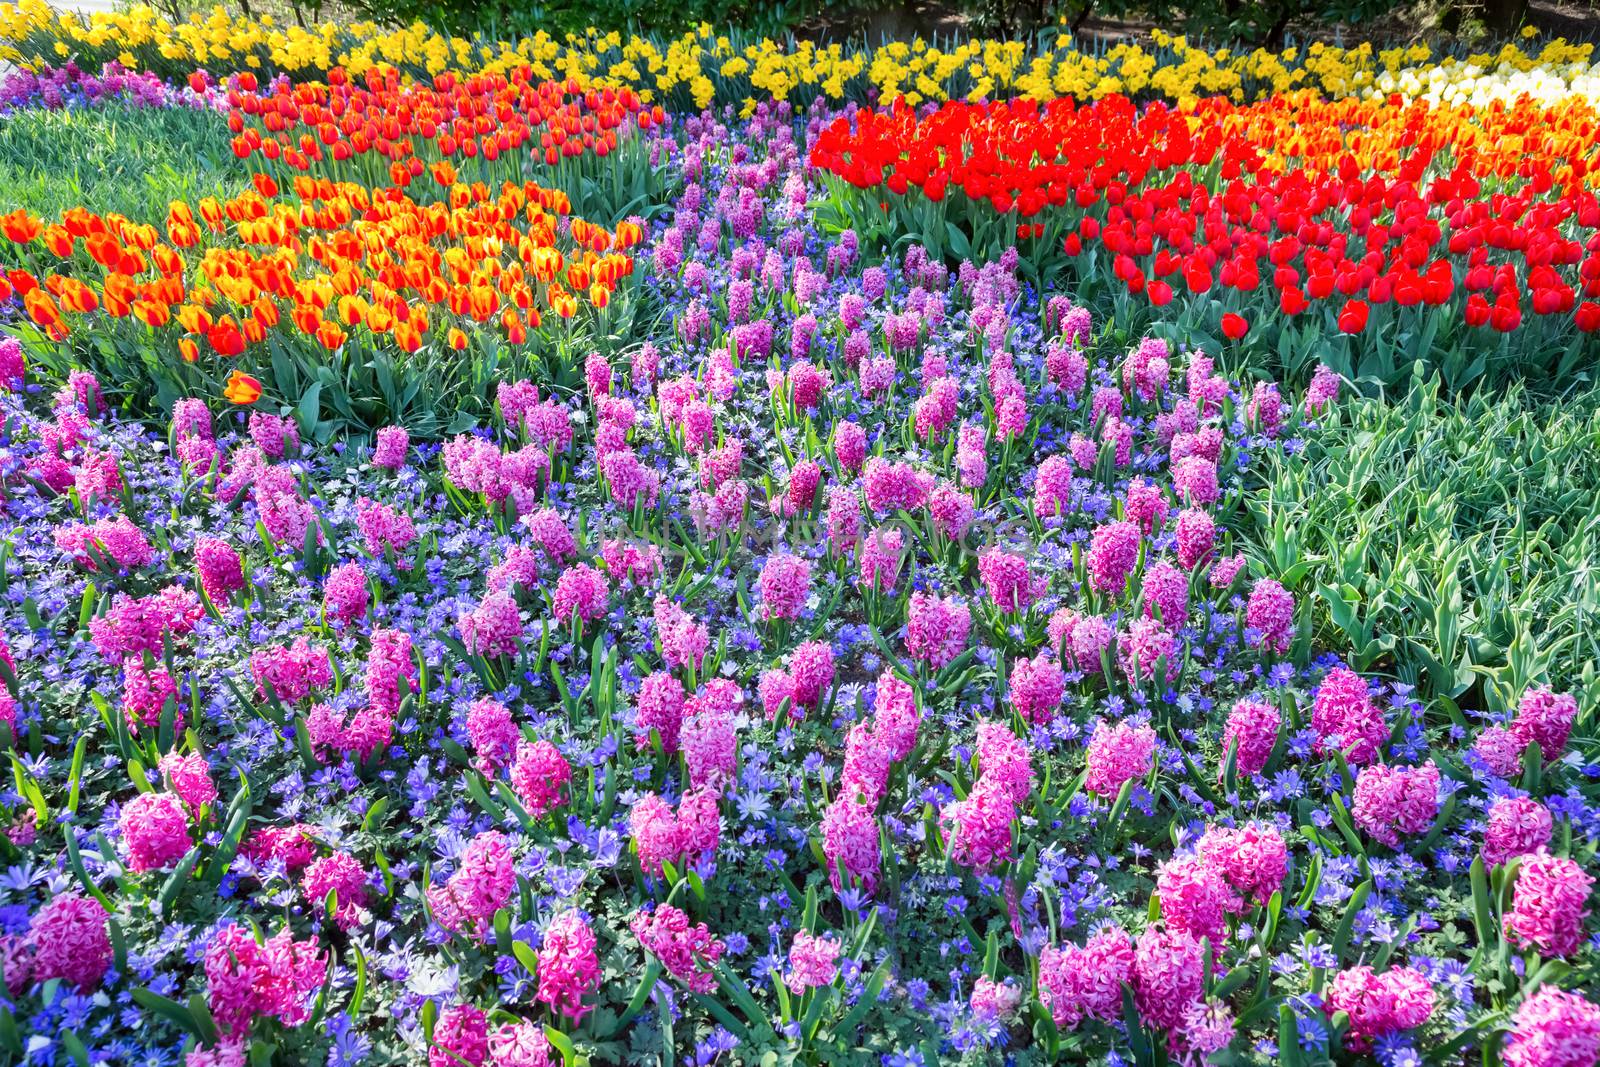 Field of pink hyacinths and red tulips in Keukenhof Holland